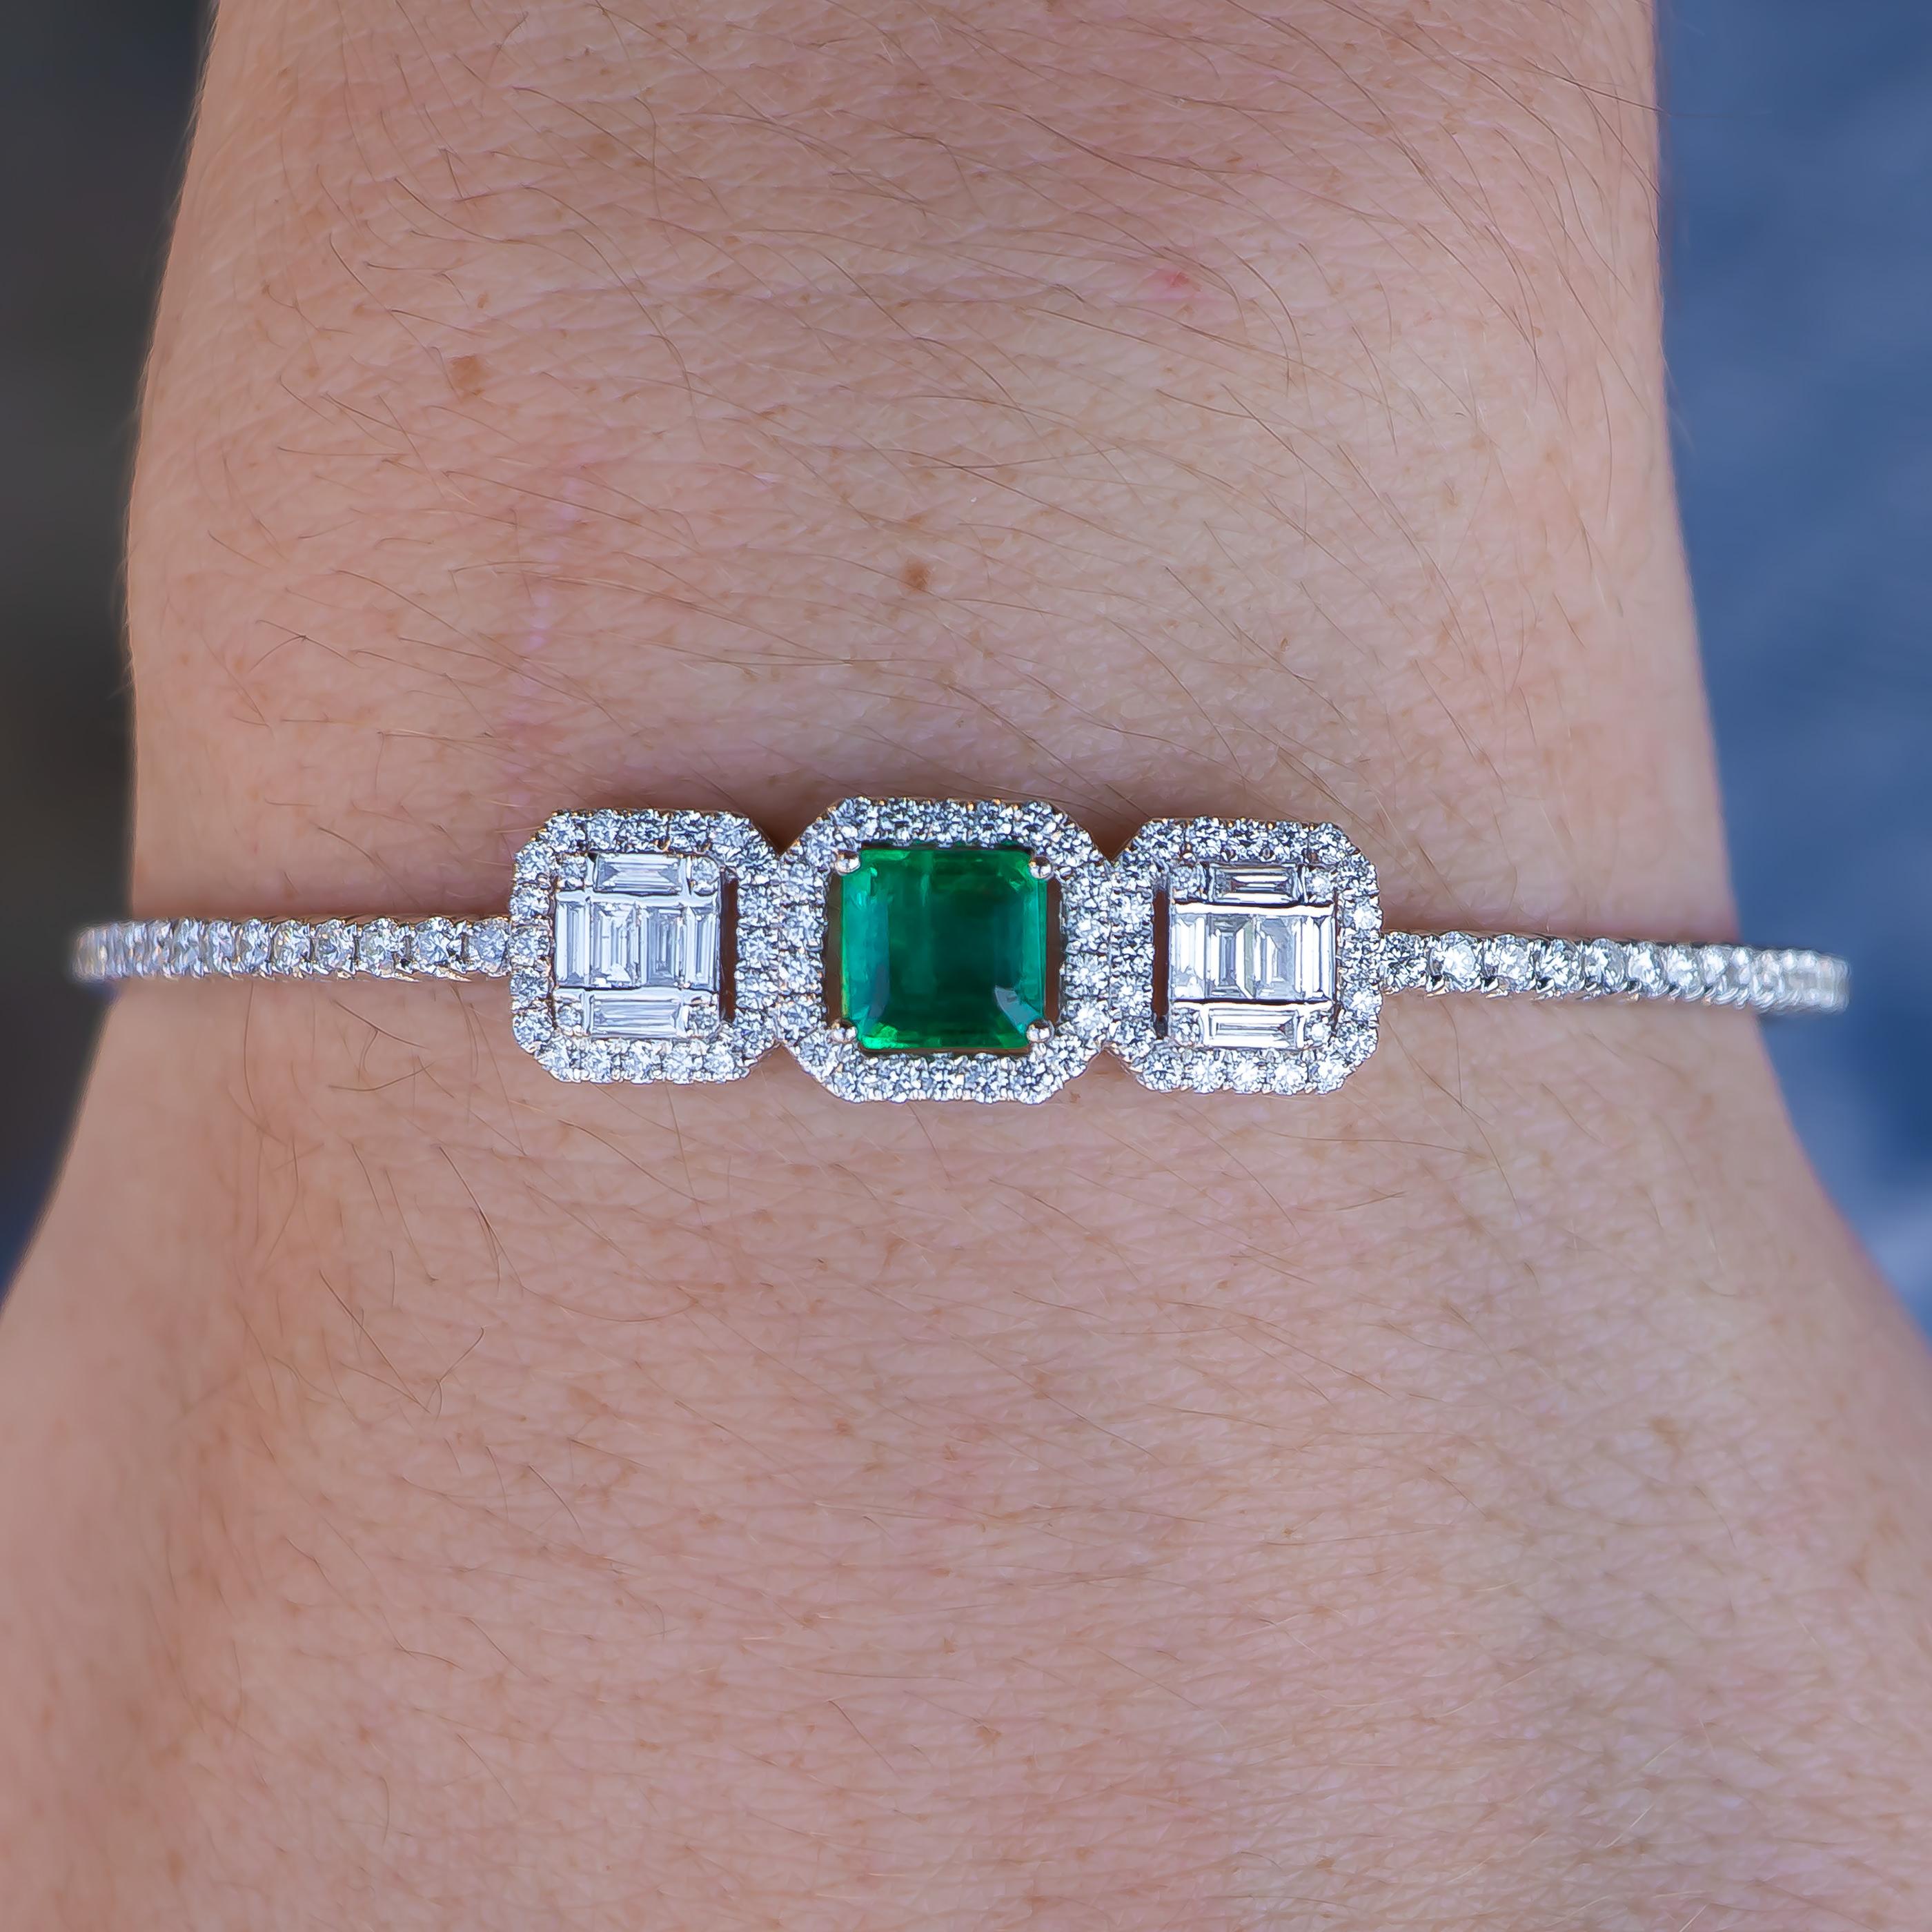 Emerald = 1.60 Carat

Diamonds = 2.10 Carats
Color: F
Clarity: VS

18K White Gold
Jewelry Gift Box Included
